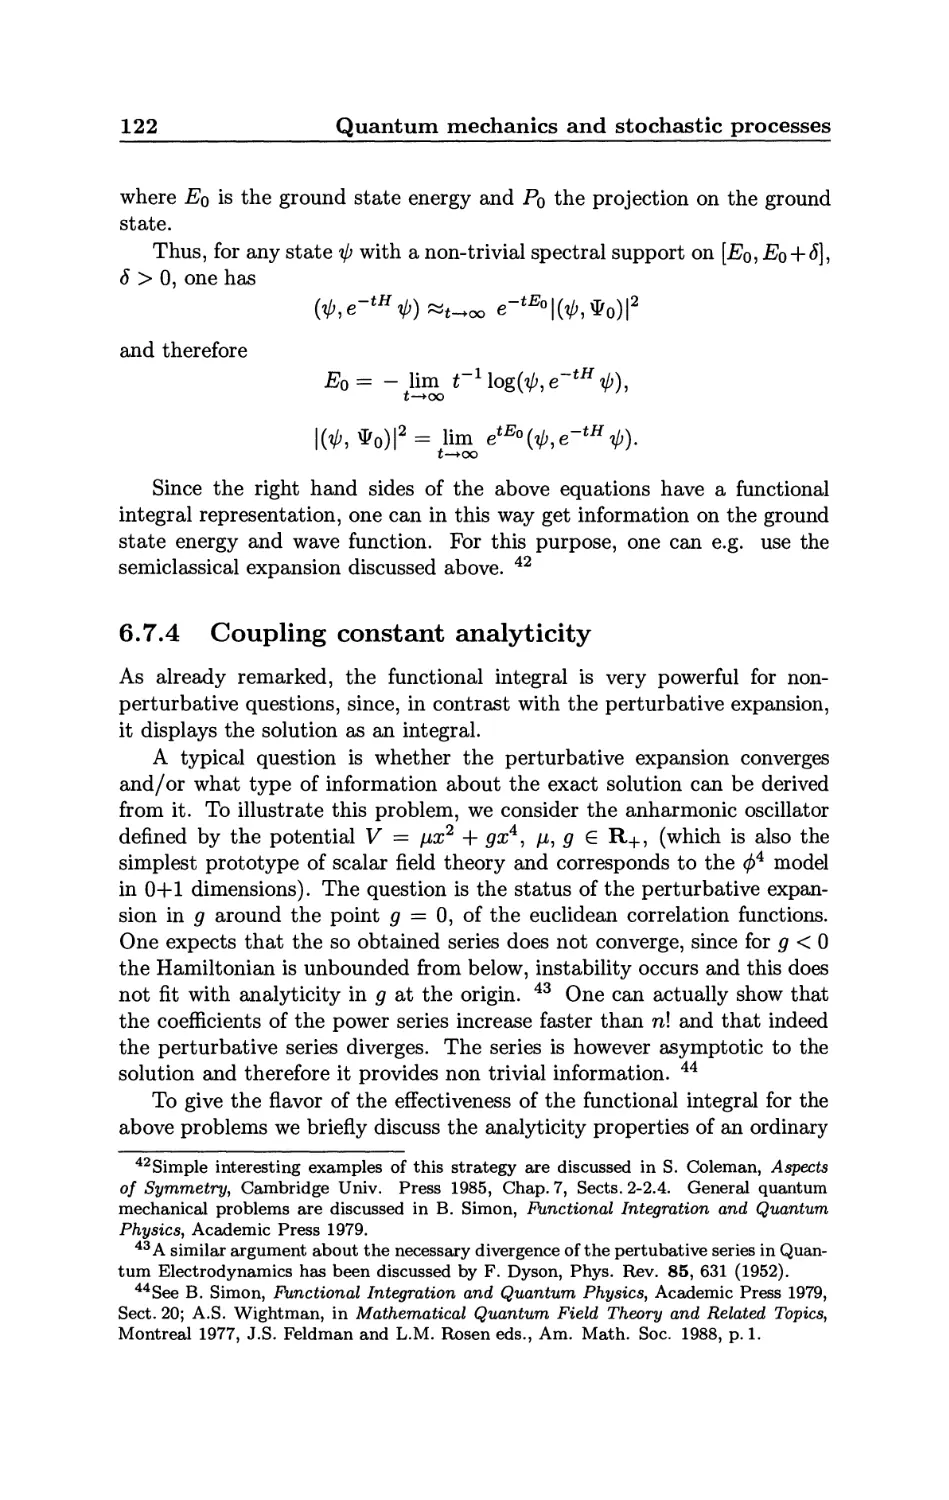 6.7.4 Coupling constant analyticity